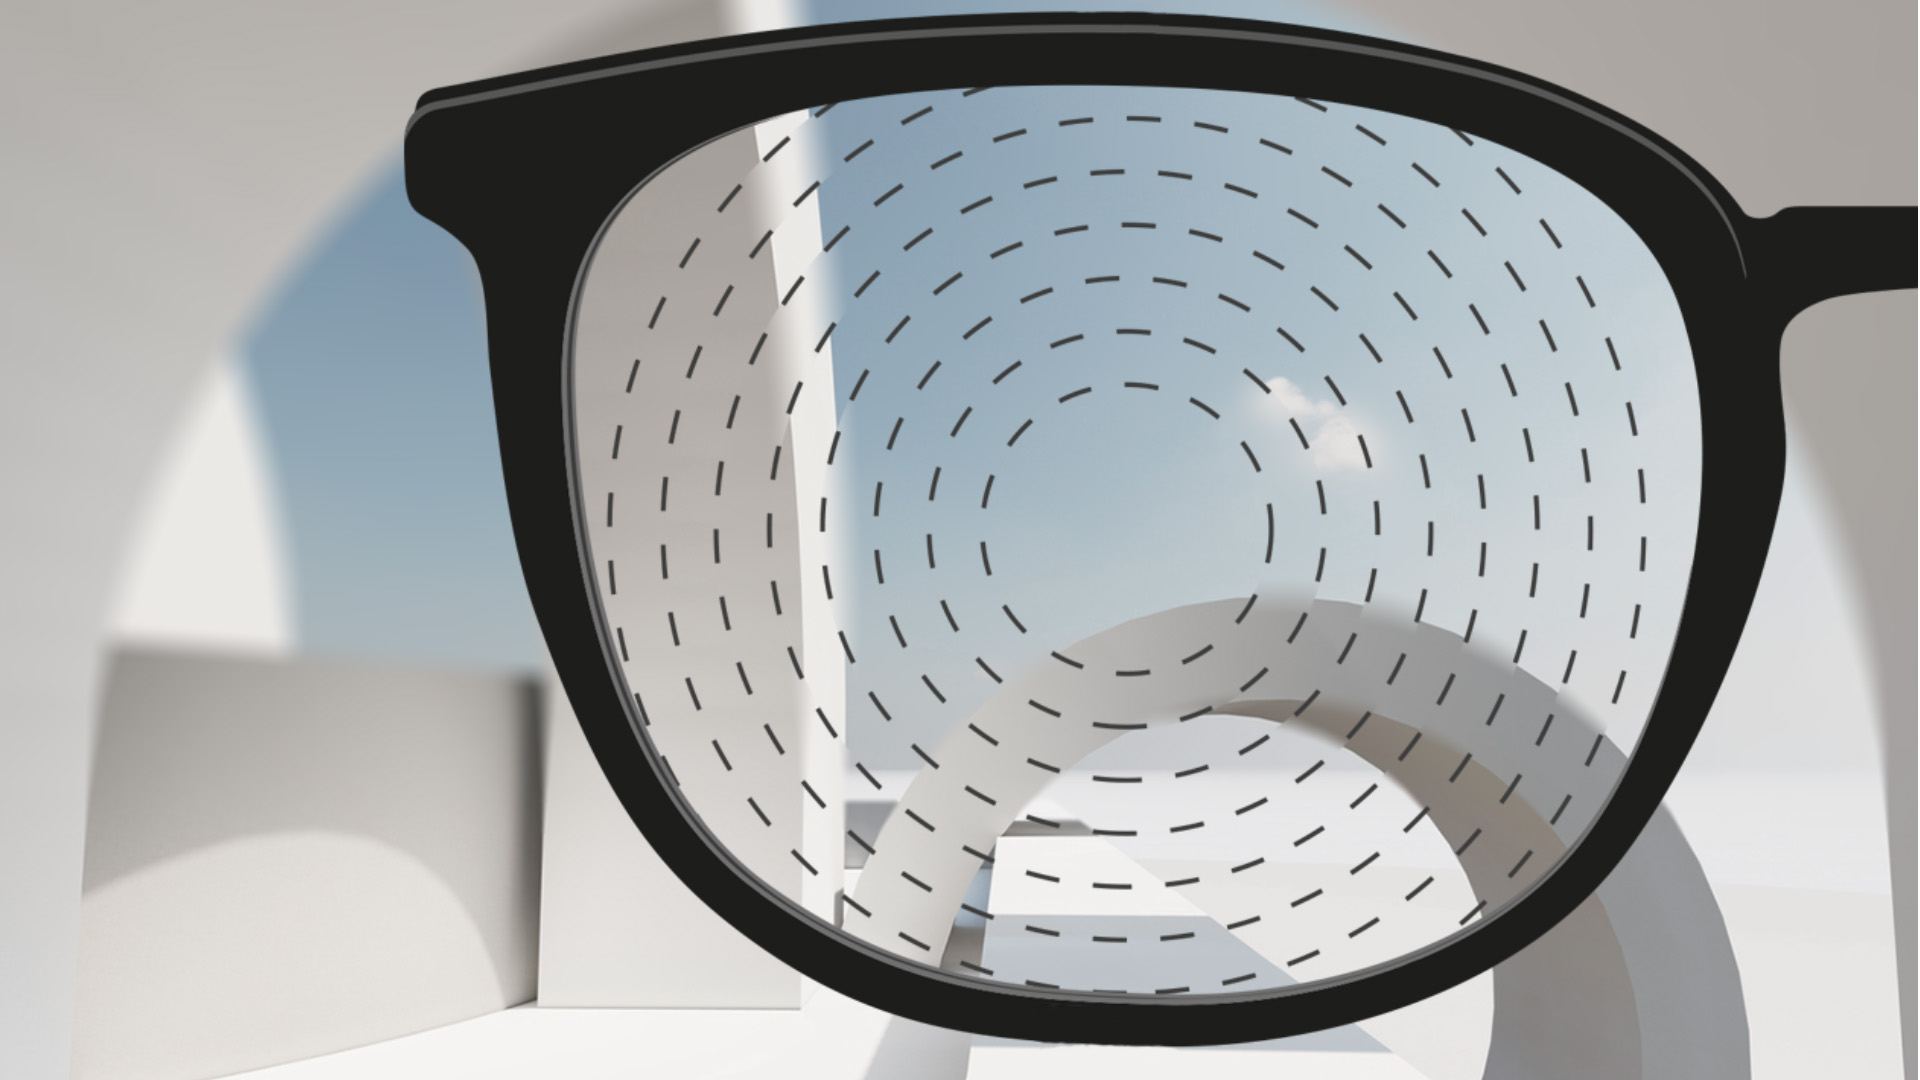 A point of view image with lenses for myopia management by ZEISS.